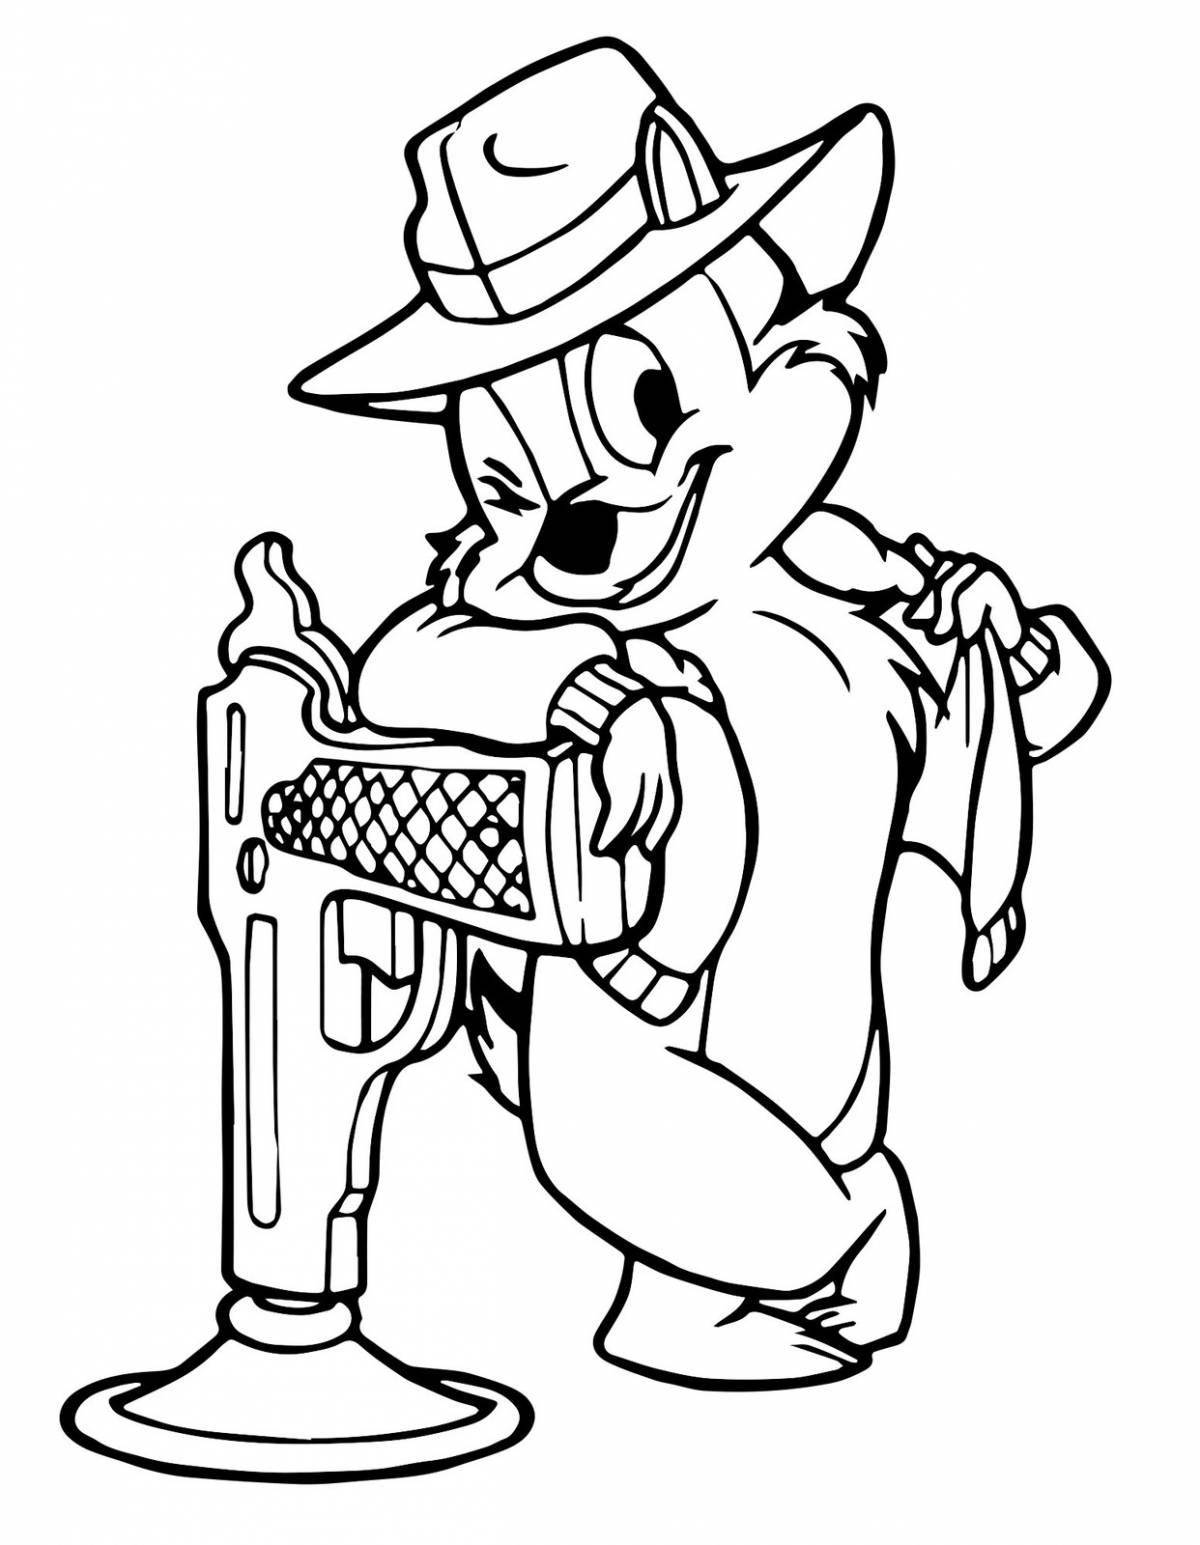 Chip and dale live coloring page